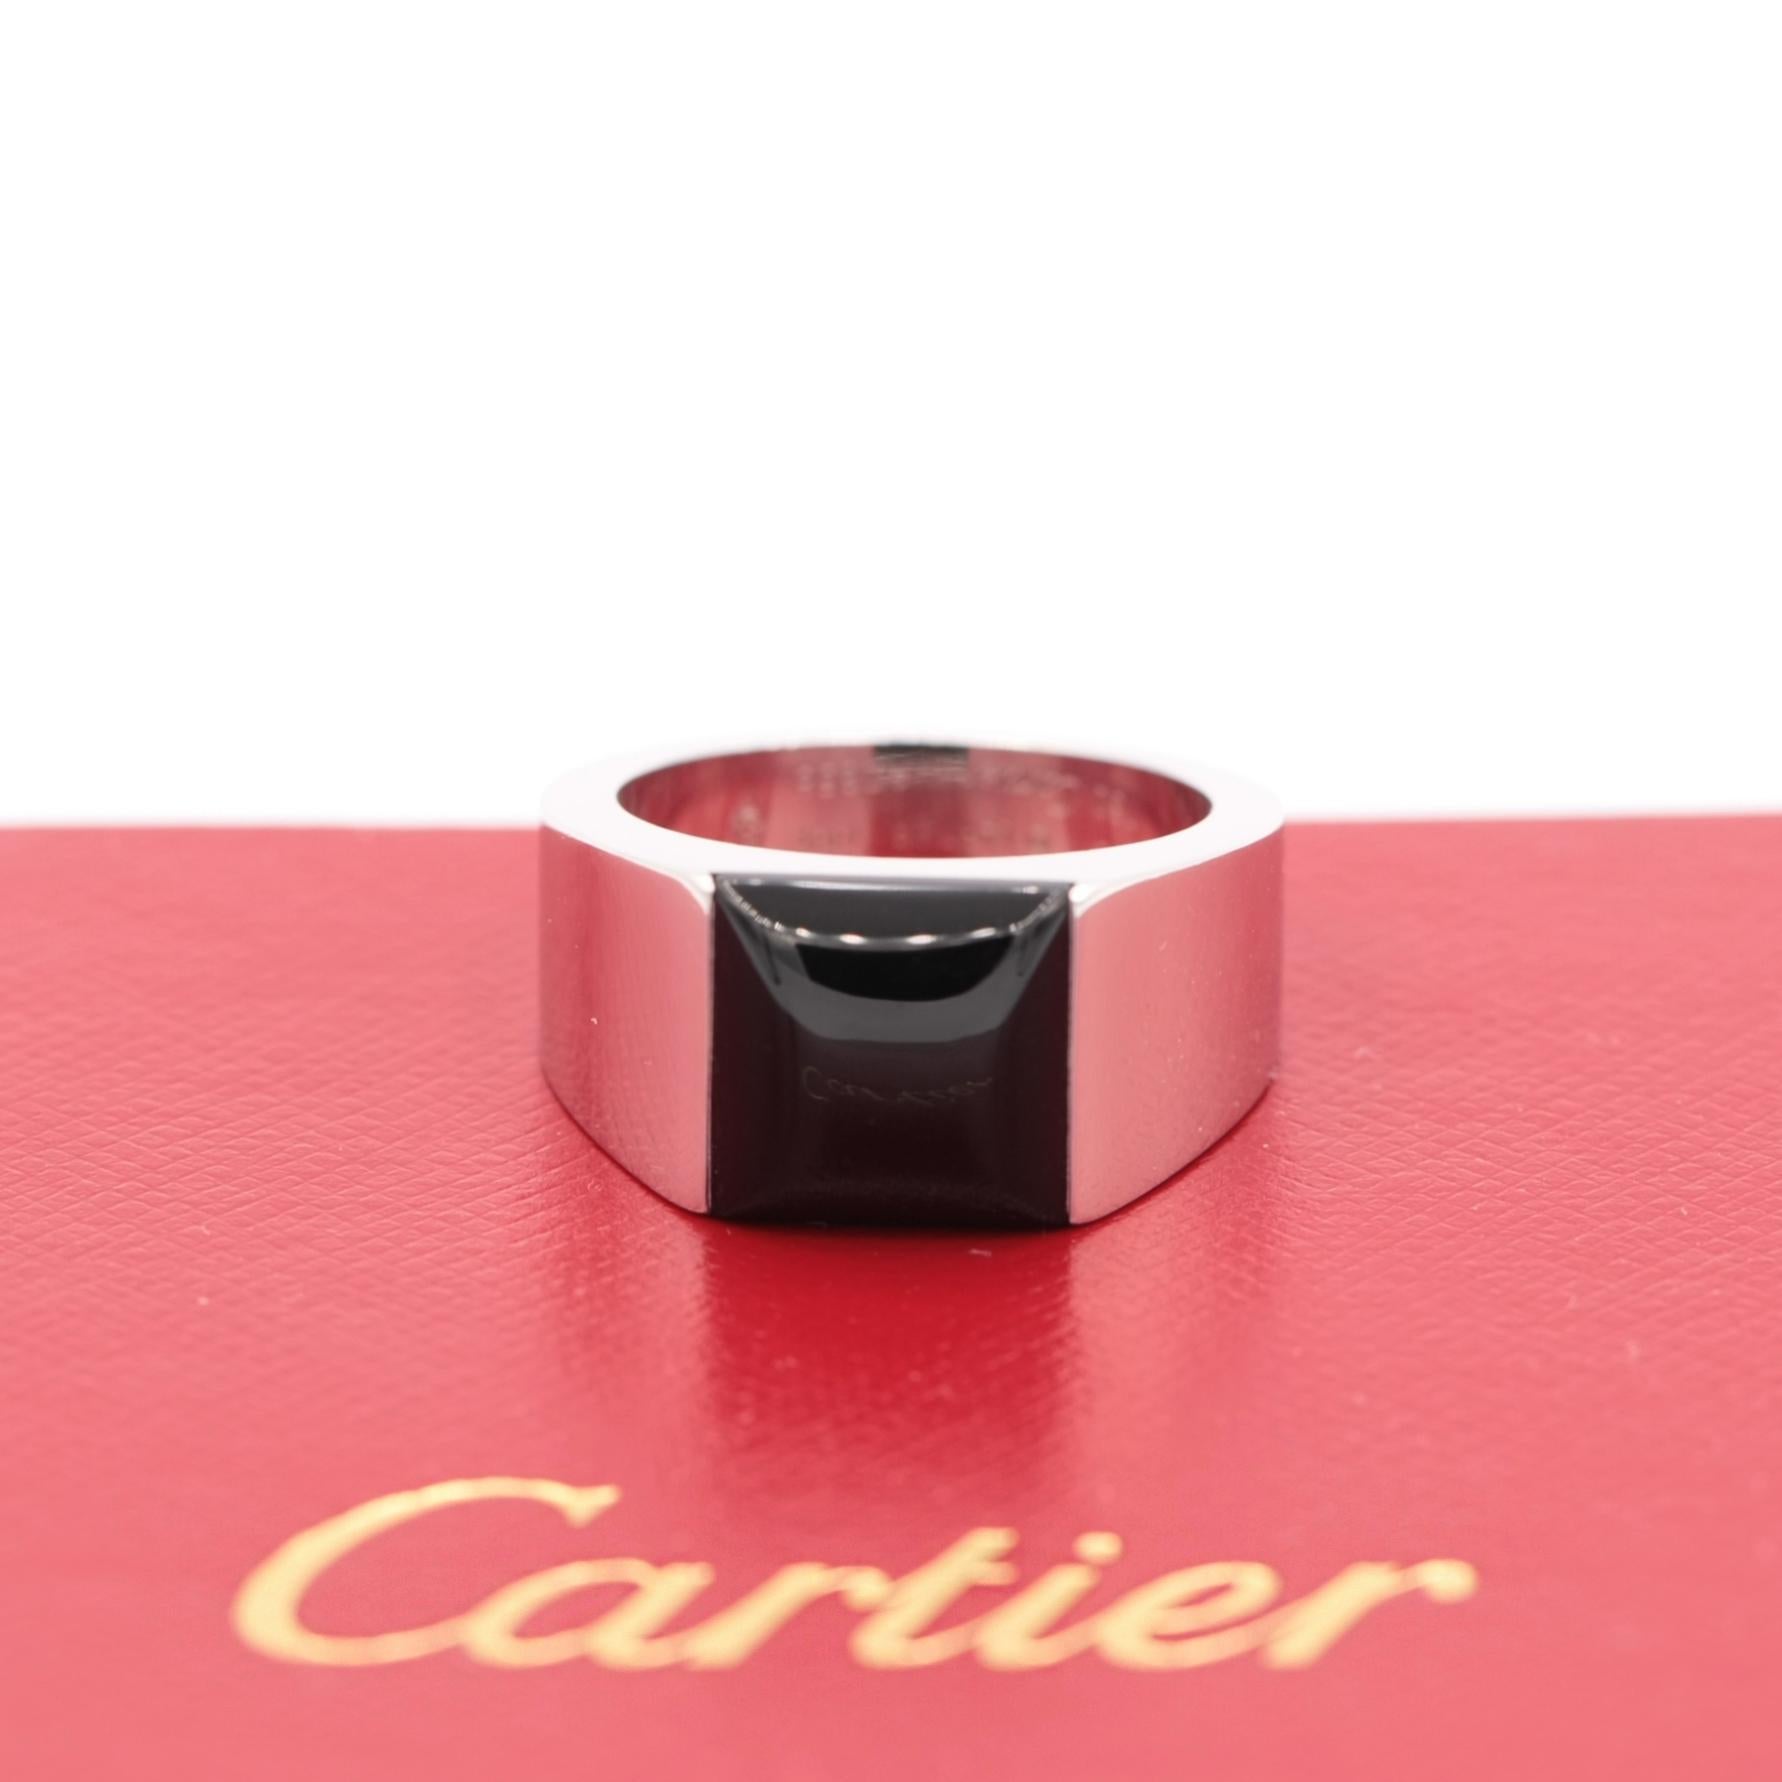 This impressive ring is made of 18 karat white gold and features a single black onyx stone.

This ring showcases Cartier's elegance and sophistication.

Stamped and hallmarked Cartier. 

Unisex Size 10.25 Eu 62 Ring

Excellent condition.
Retail